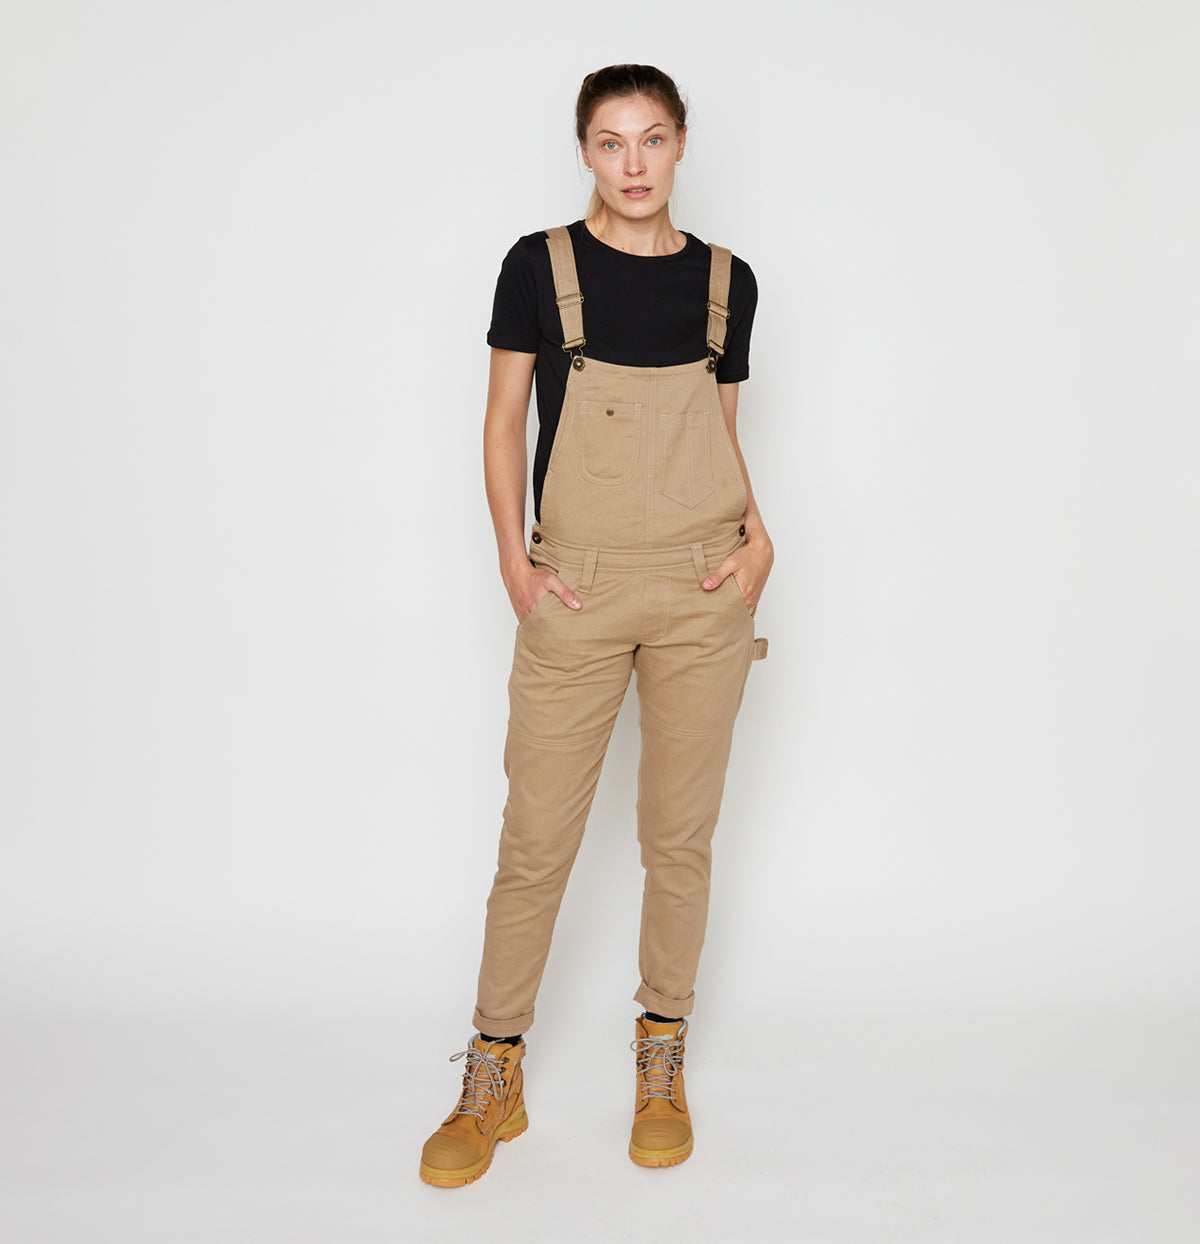 2607 Overalls/Dungarees - Sand